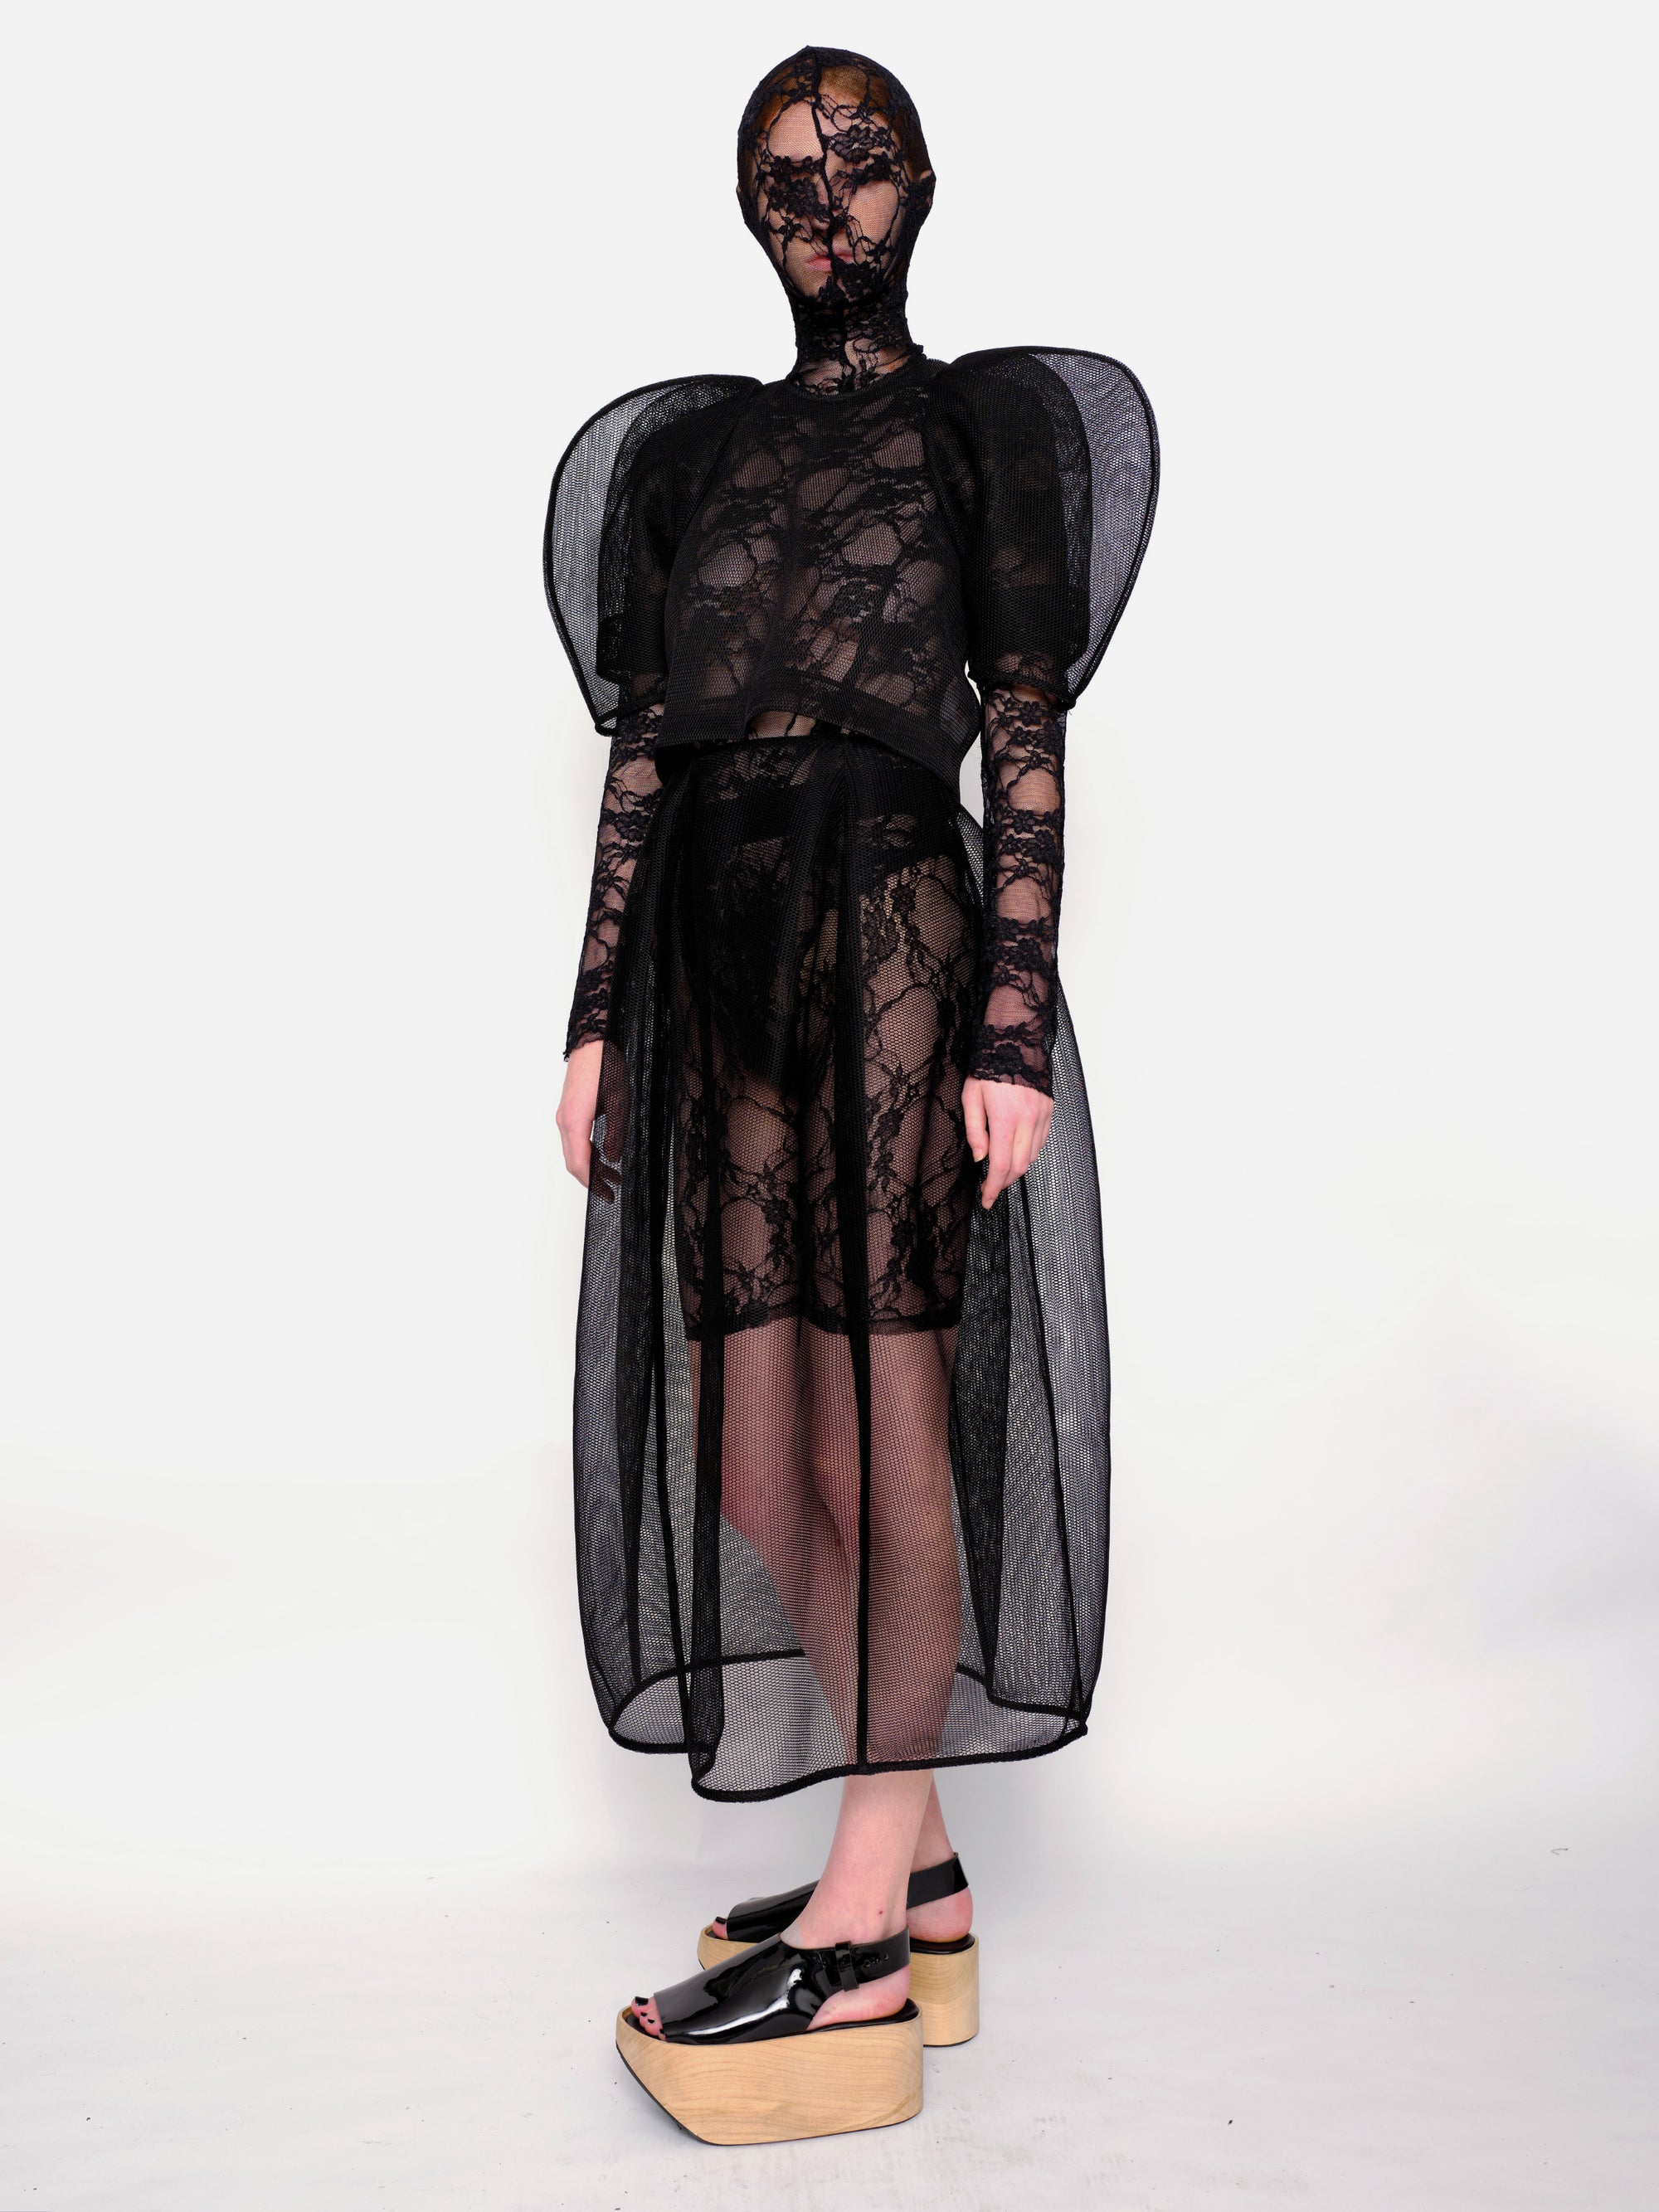 Woman-standing-against-white-background-wearing-Melitta-Baumeister's-black-head-covering-under-layer-covered-by-sheer-lace-dress-with-mesh-fabric-and-puffed-shoulders-and-wearing-platform-sandals